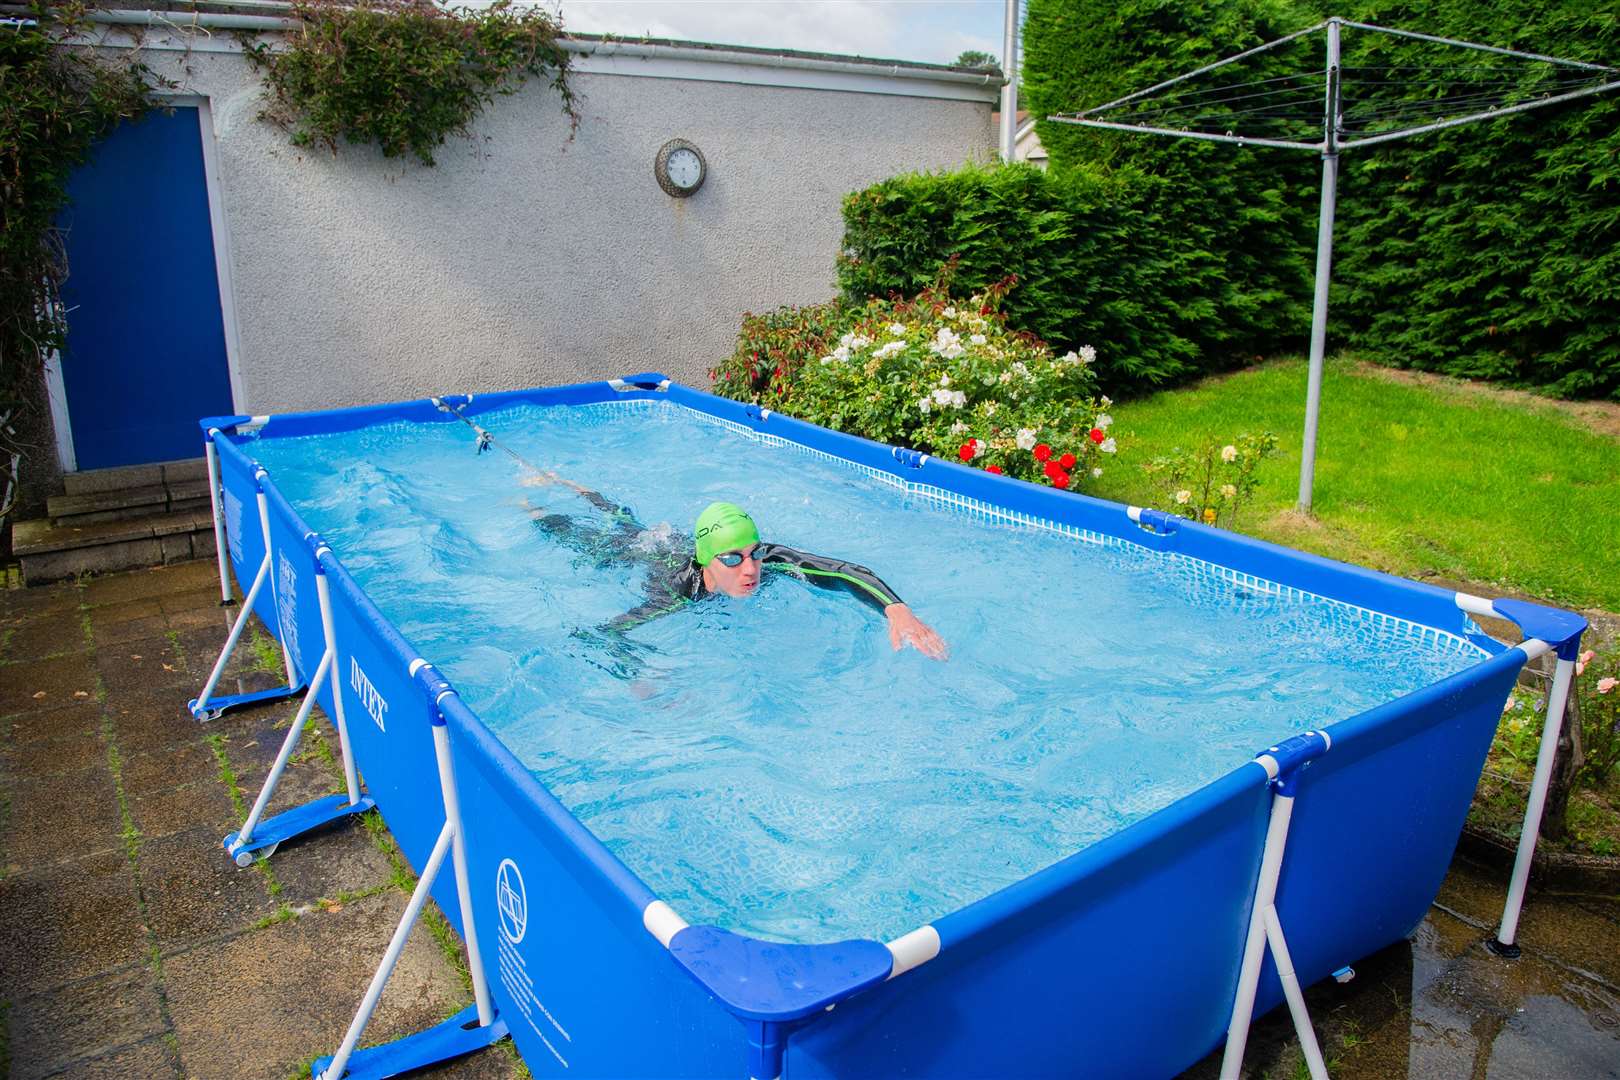 Cameron Main in a makeshift training pool at home. Picture: Daniel Forsyth